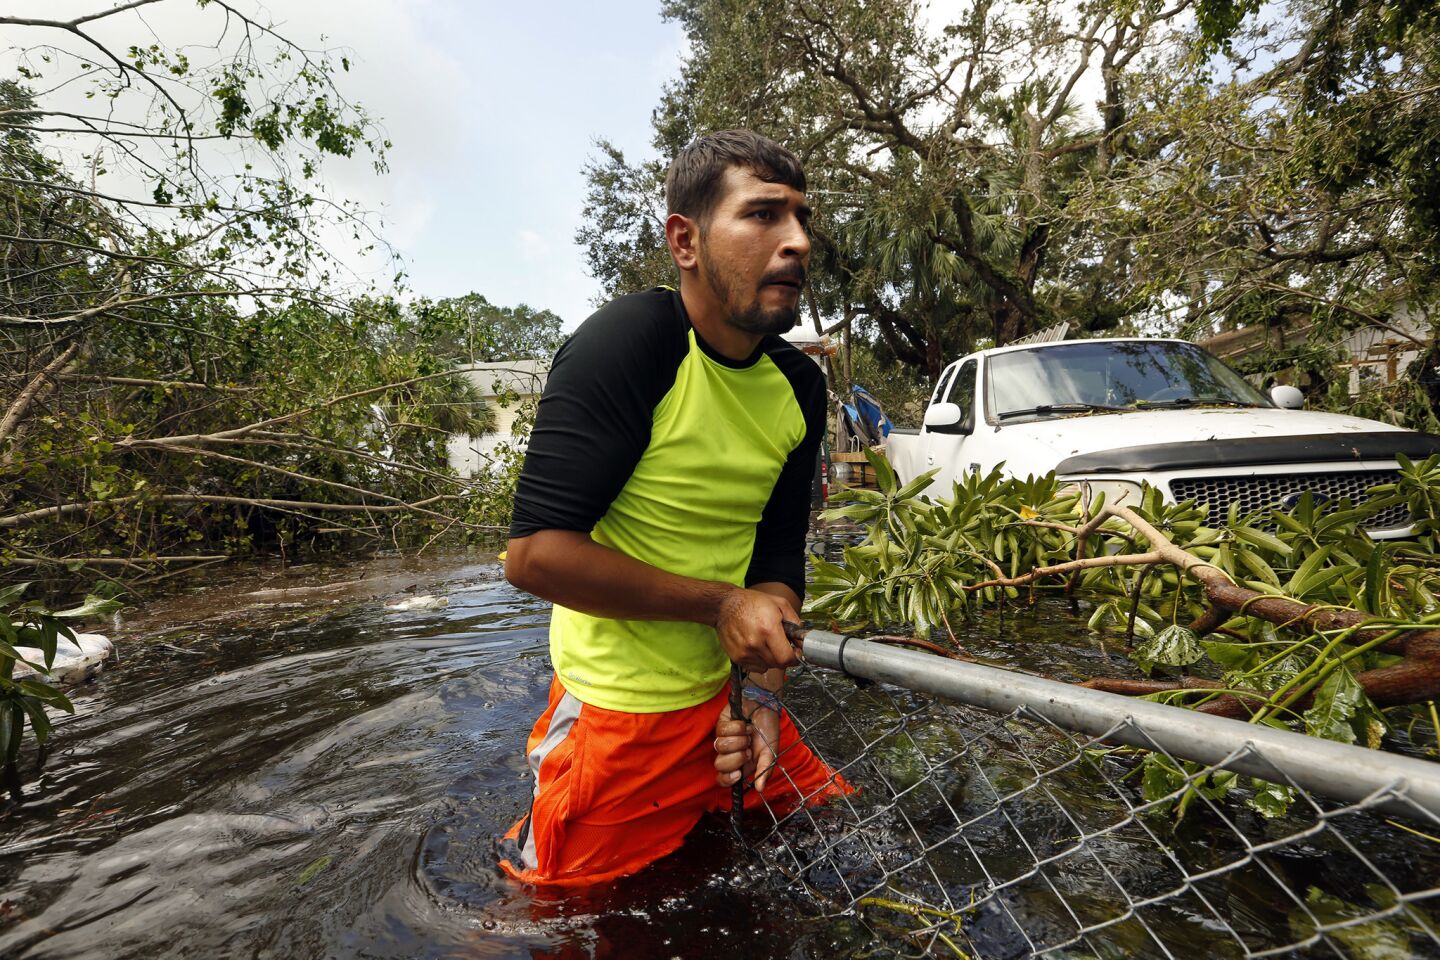 Israel Alvarado, 25, tries to open a gate blocked by fallen tree branches to retrieve a generator in